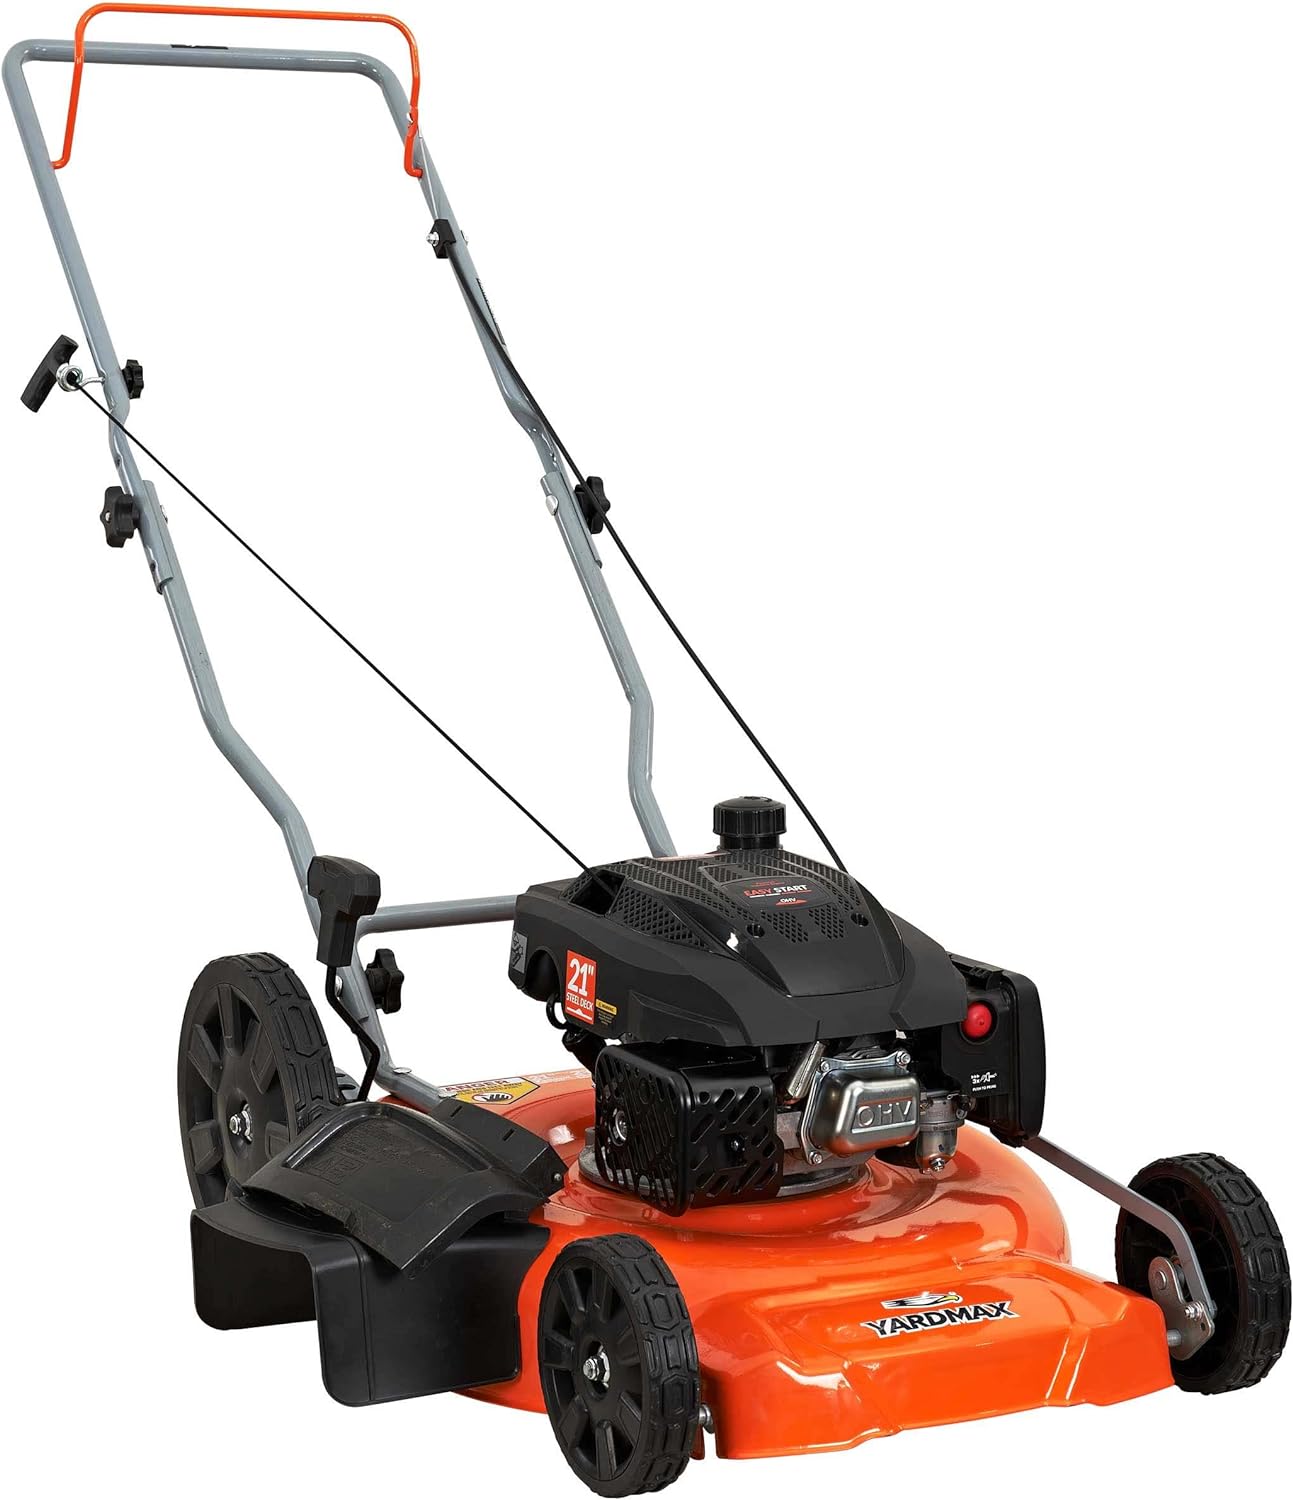 Purchased this lawn mower and it is so easy to use, starts well, easy to maneuver and mows well.